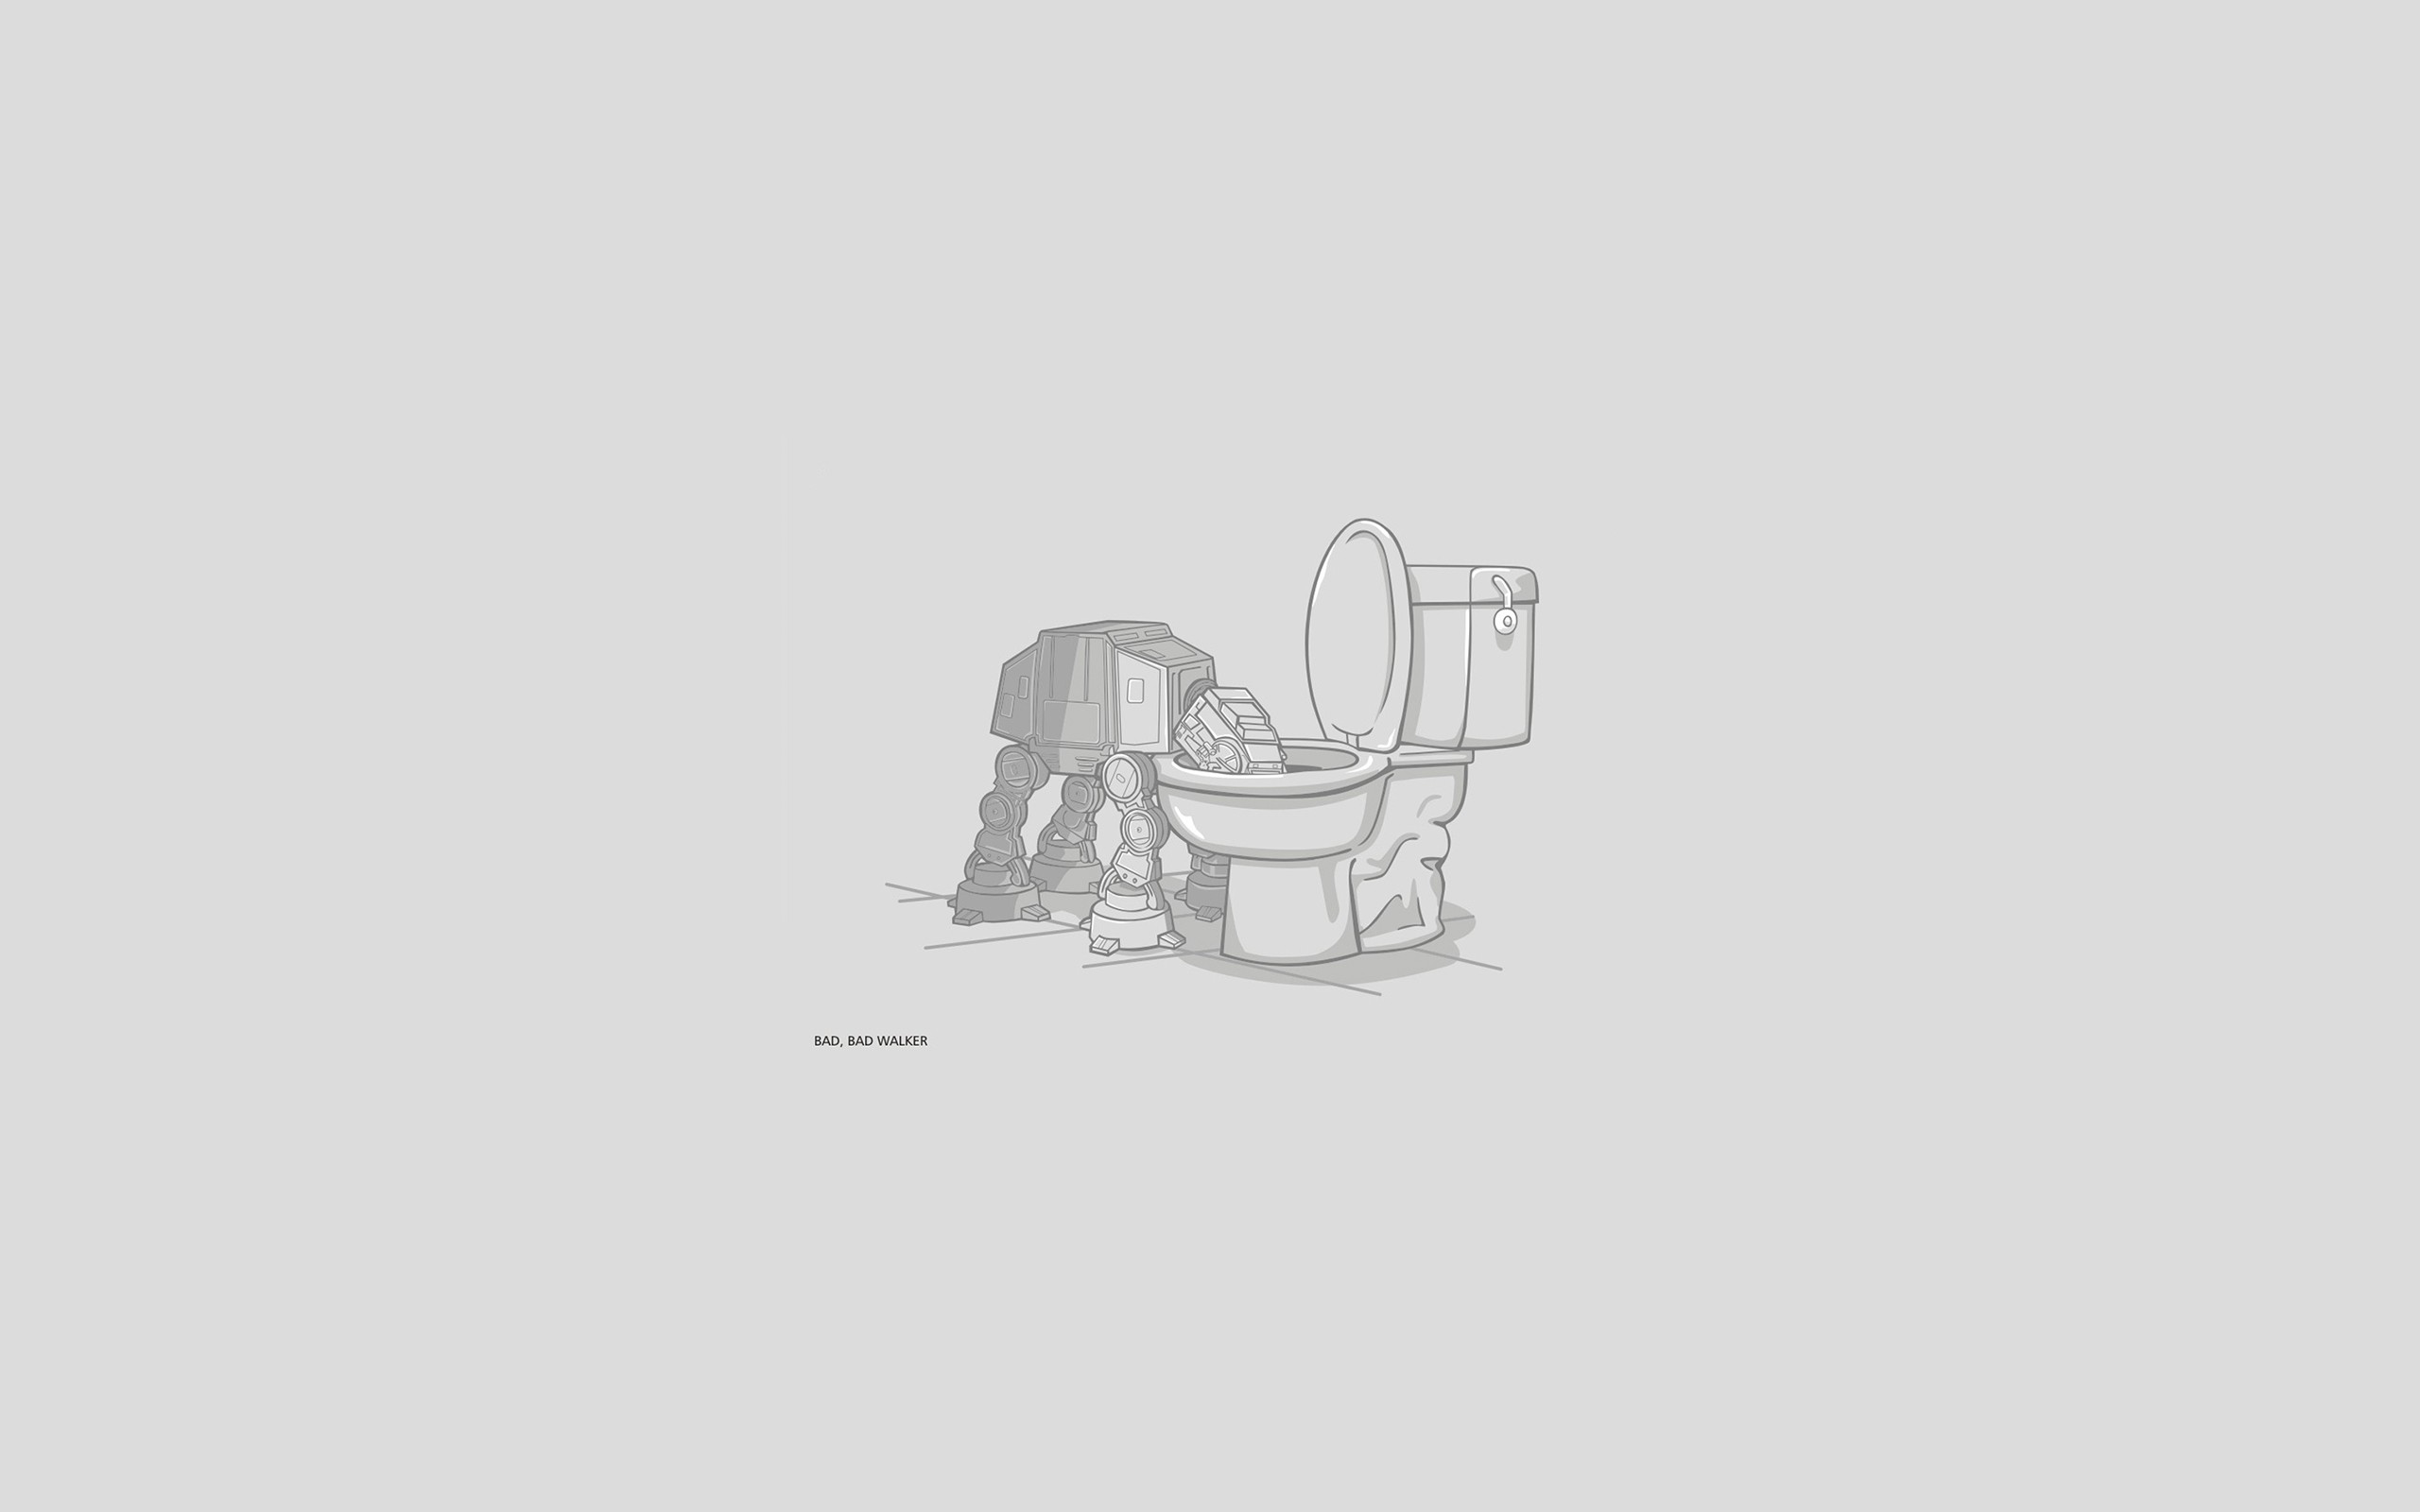 Star Wars Toilets Minimalism Humor AT AT Simple Background 2560x1600